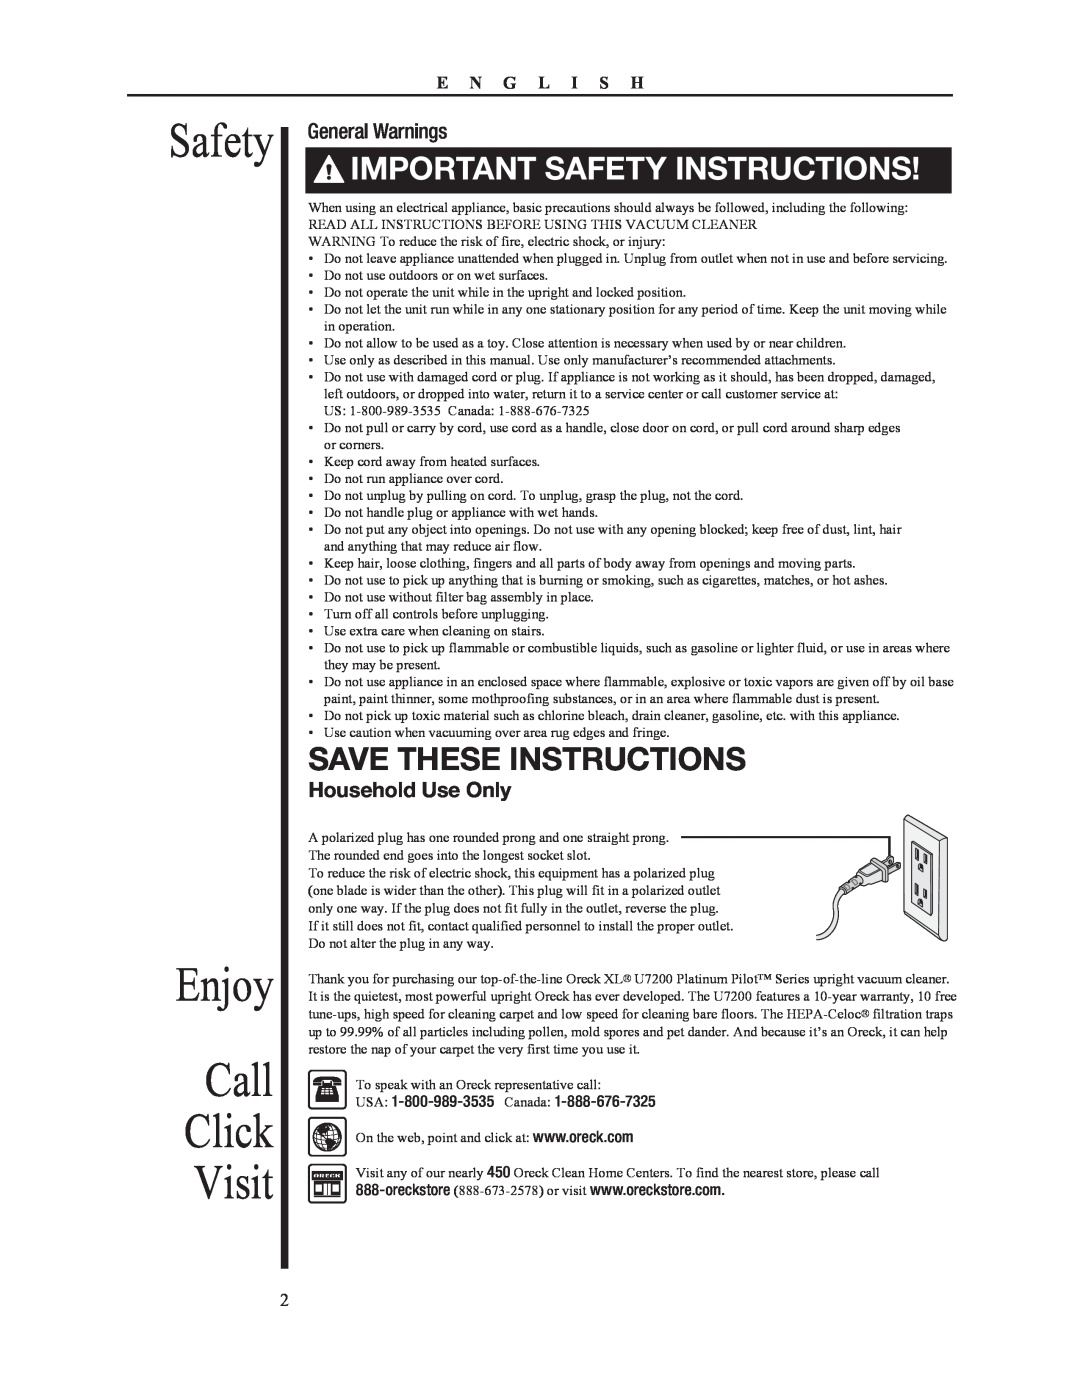 Oreck 79052-01REVA Safety Enjoy Call Click Visit, Important Safety Instructions, Save These Instructions, General Warnings 